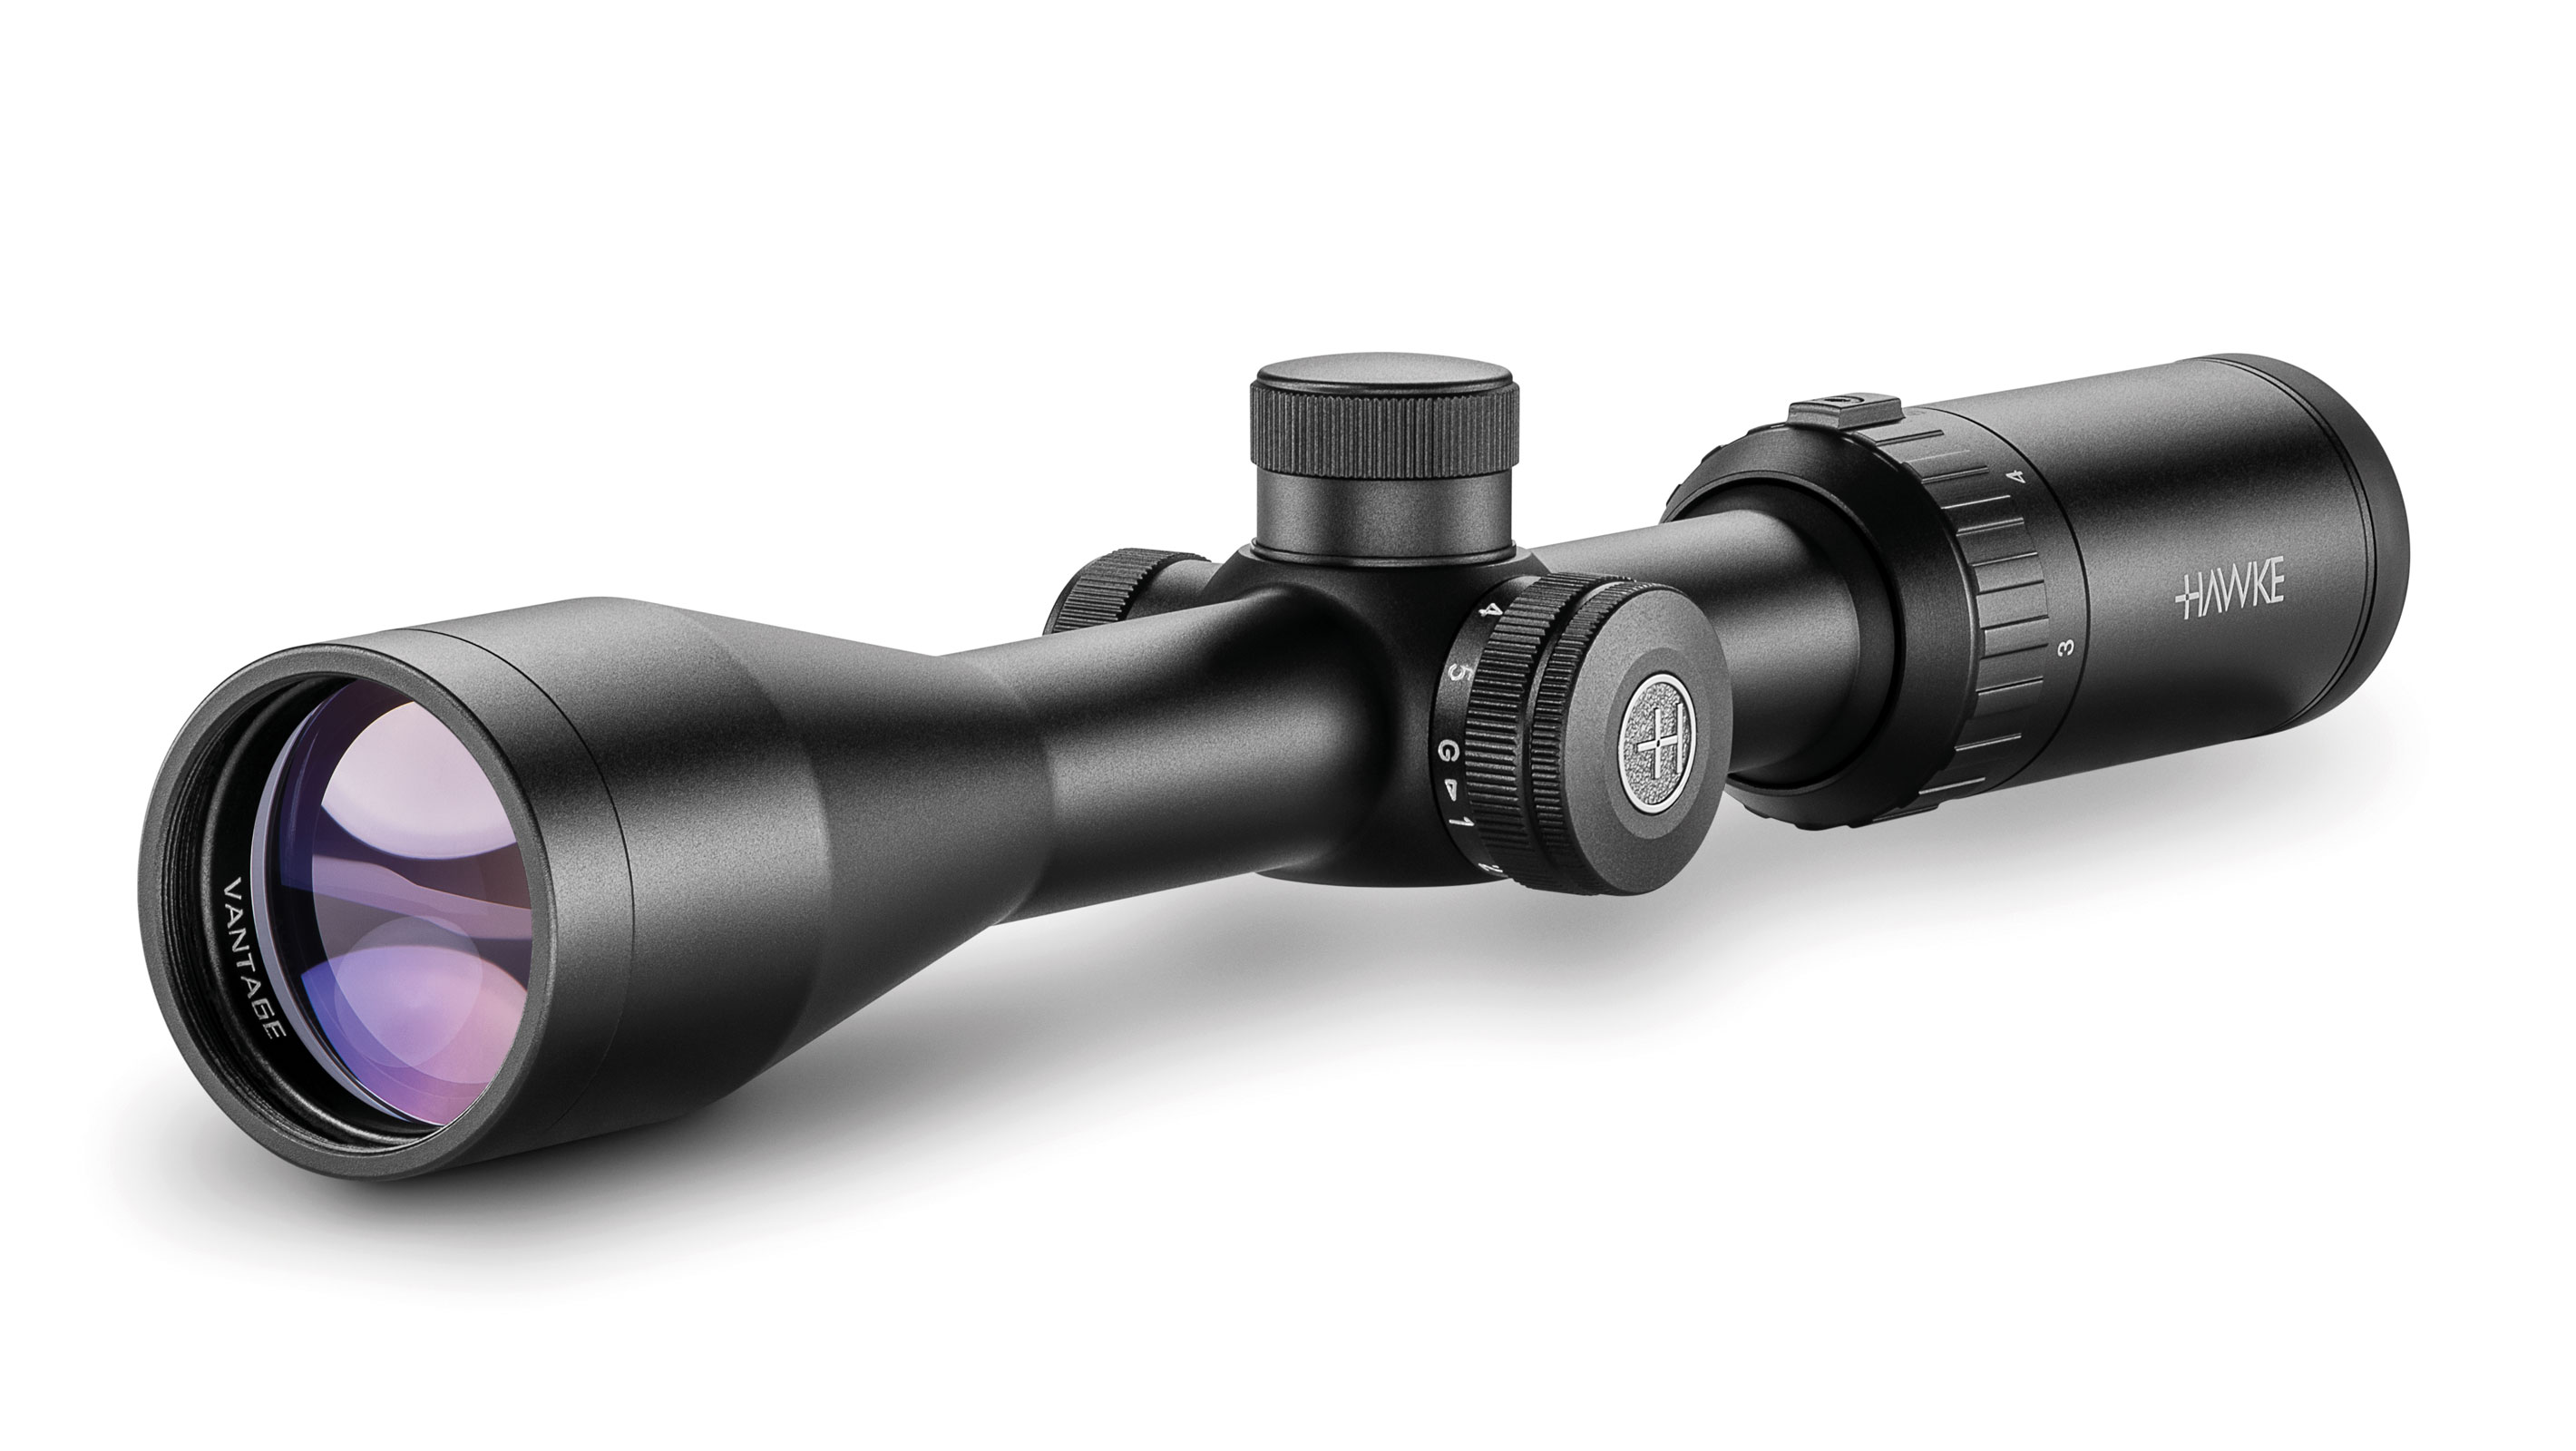 Objective End View Of The Hawke Vantage IR 3-9x40 L4A Dot Rifle Scope